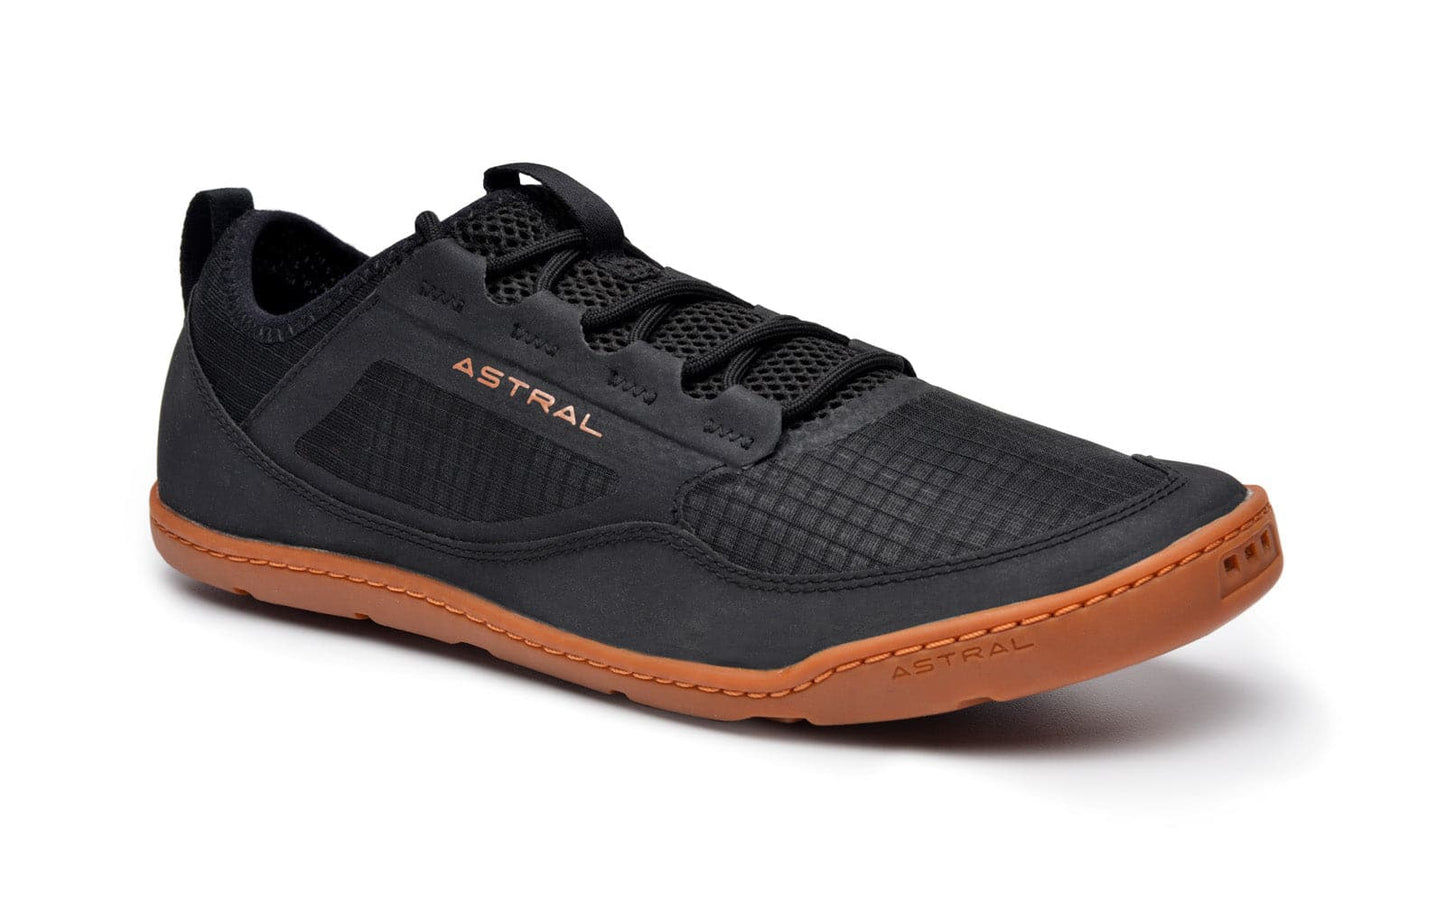 Featuring the Loyak AC - Men's men's footwear manufactured by Astral shown here from a fifth angle.